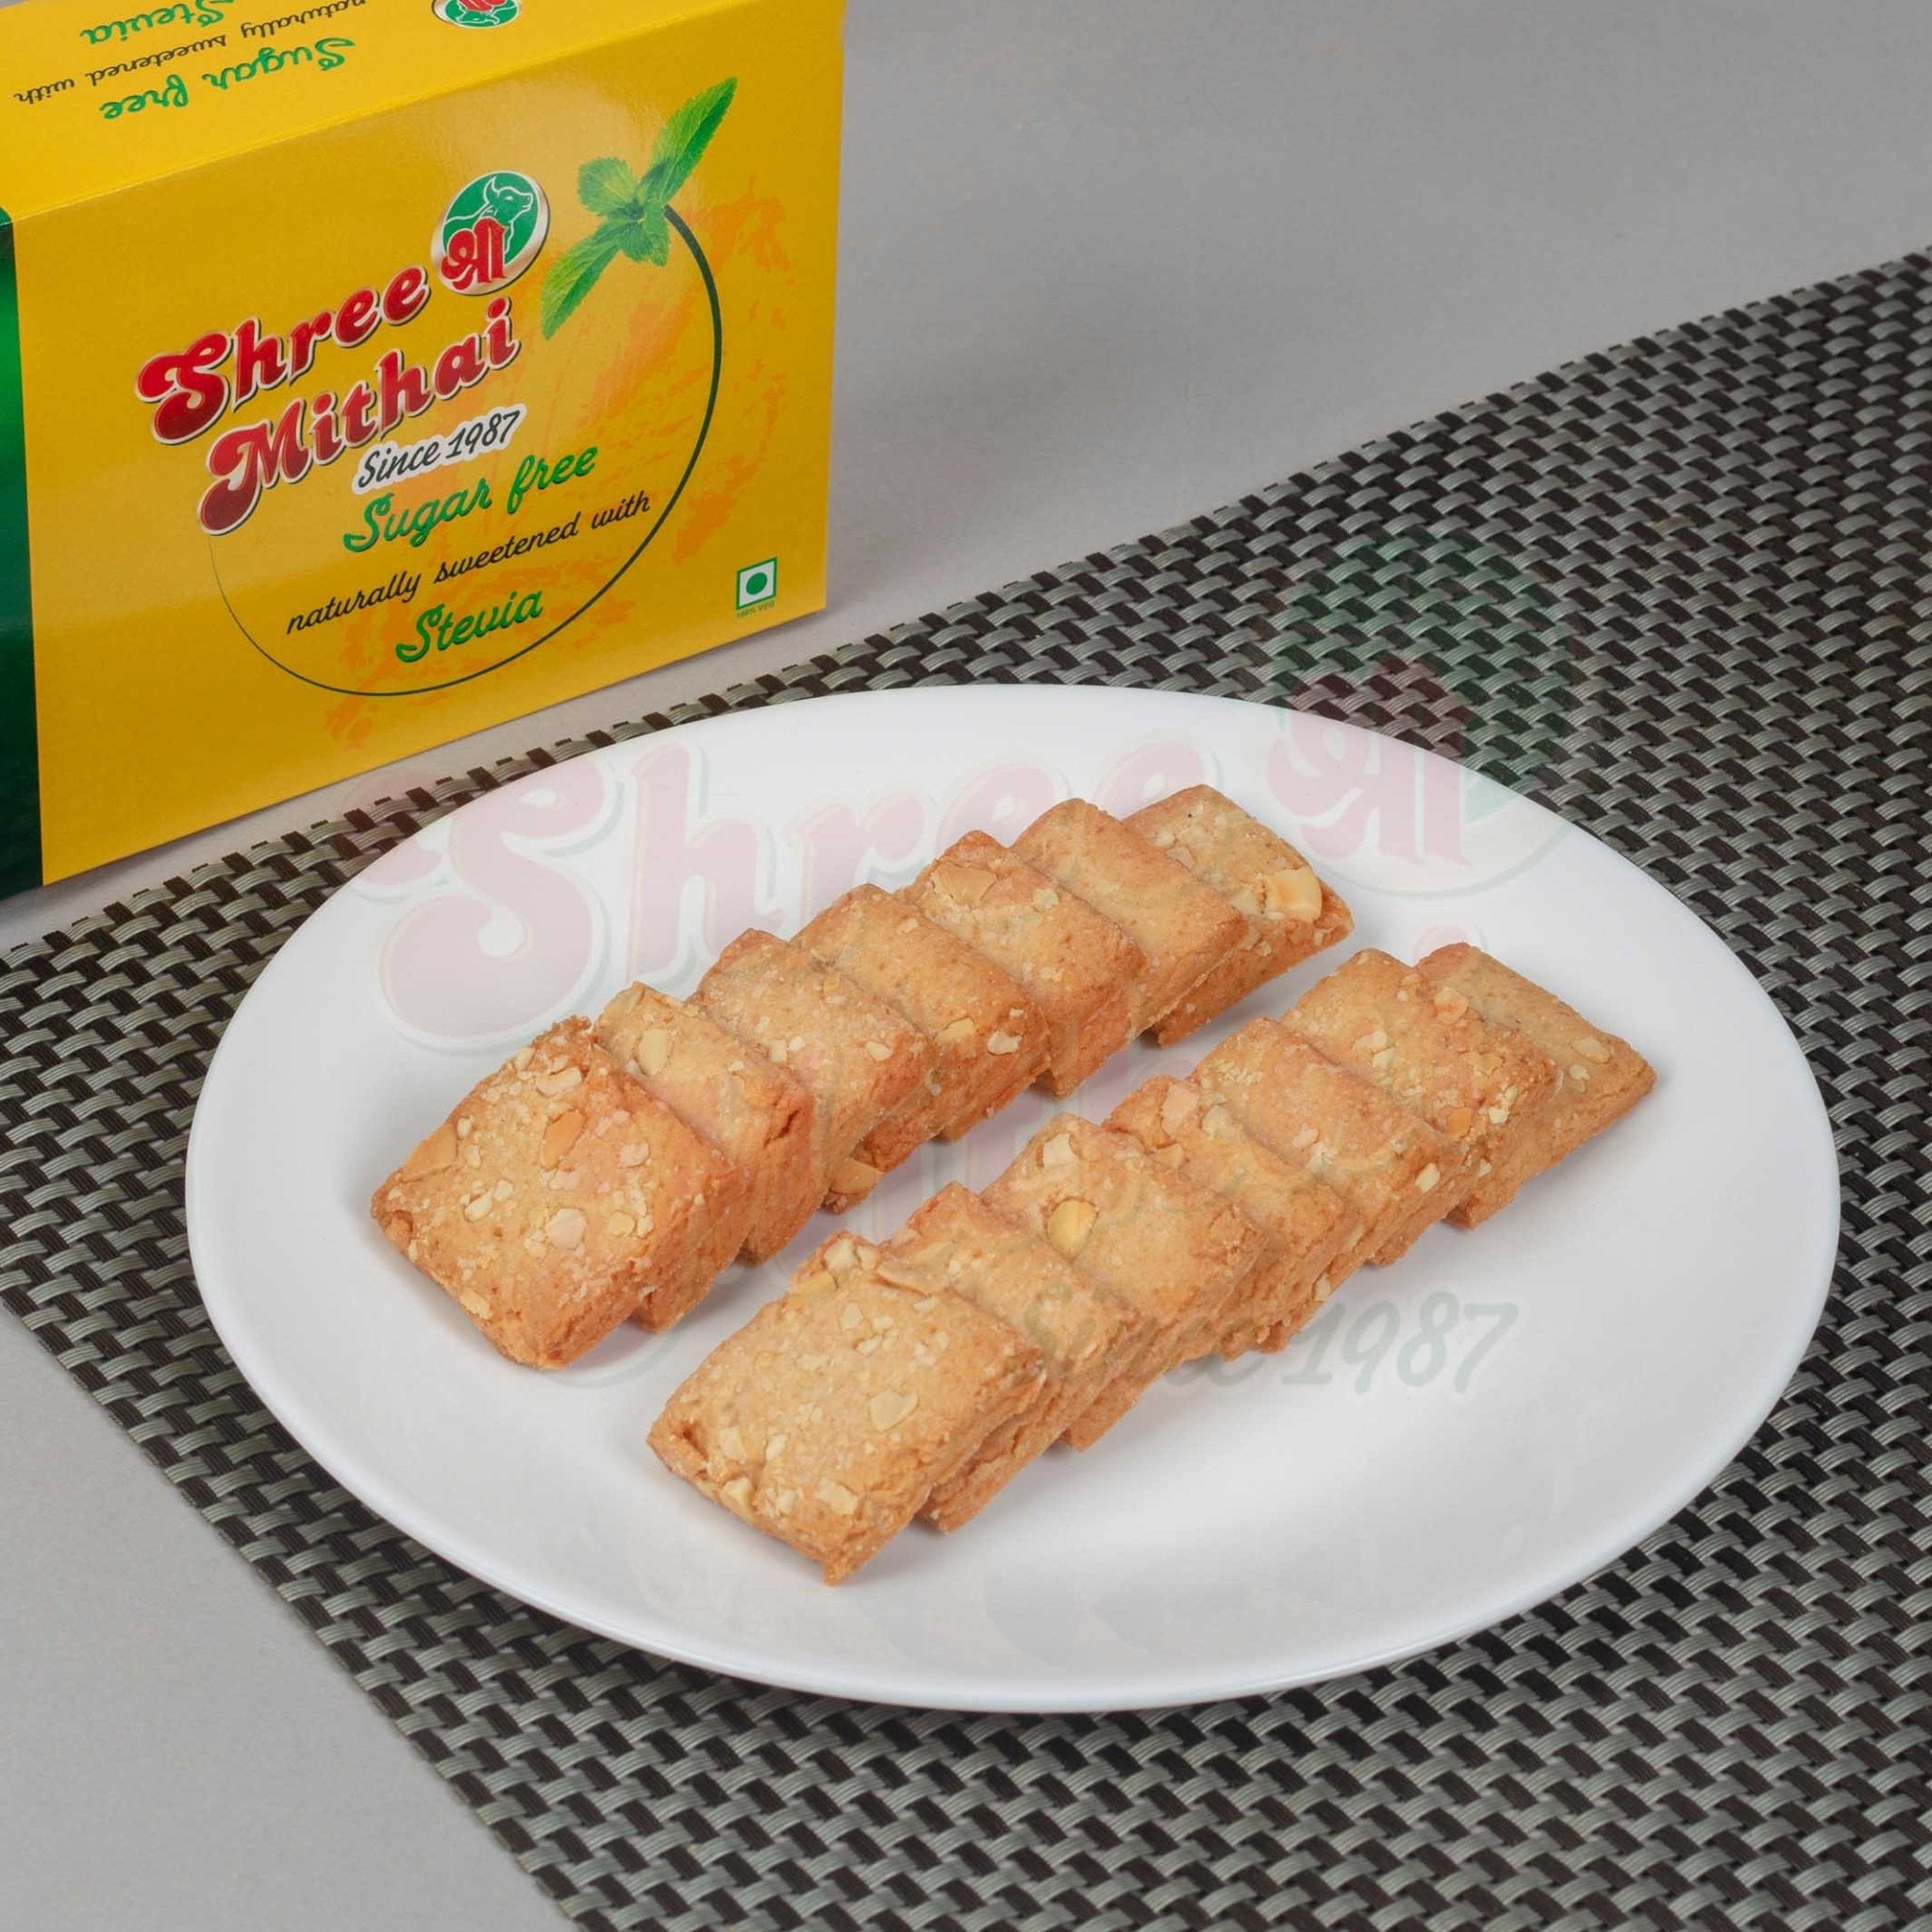 Shree Mithai - Introducing our rich and moist Mini Cakes... | Facebook